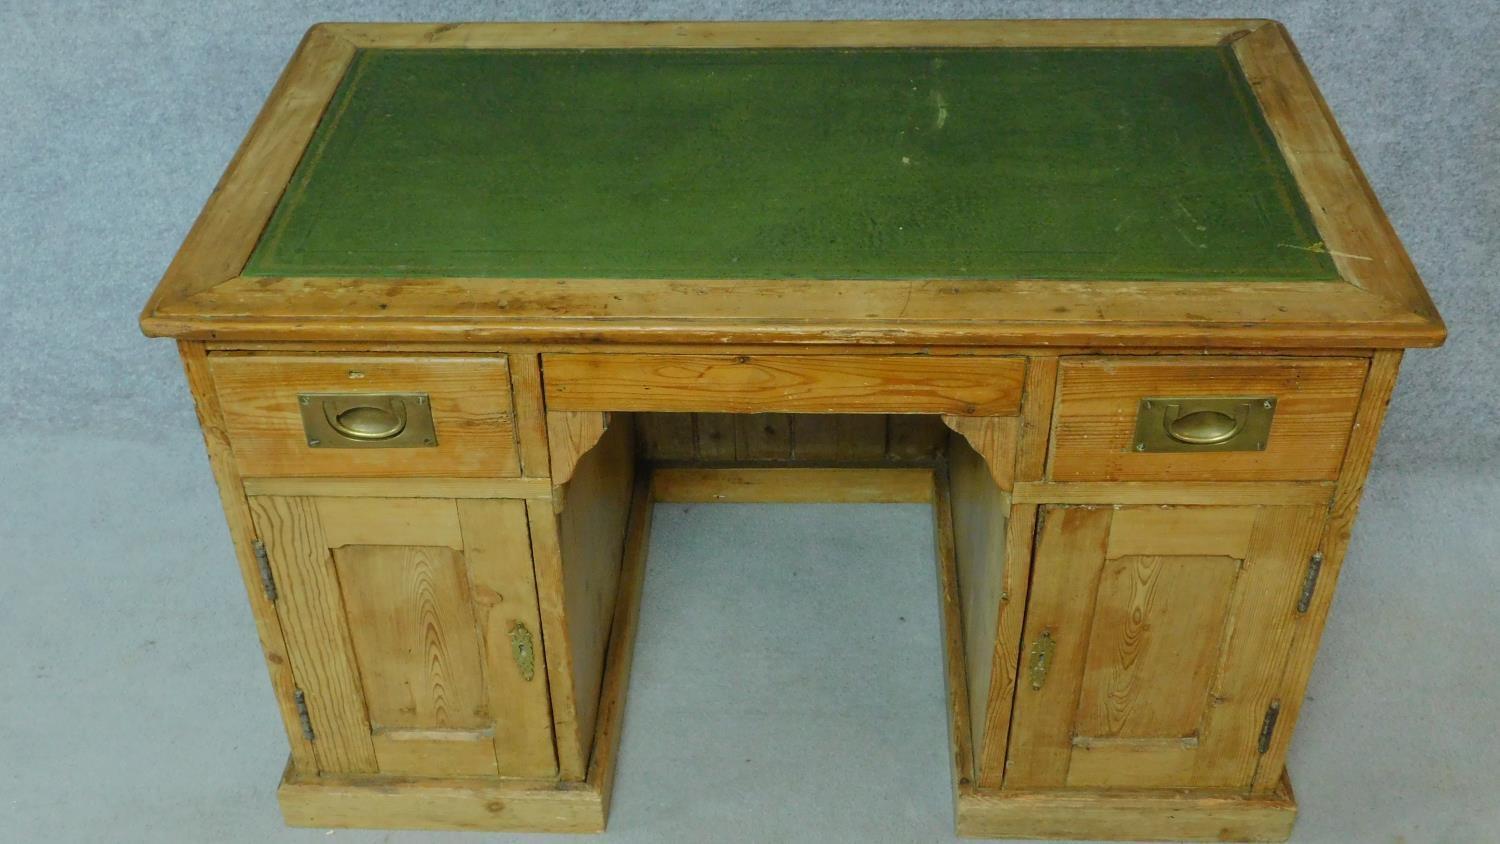 A 19th century pitch pine desk with leather top and two short drawers over panel doors enclosing - Image 2 of 6